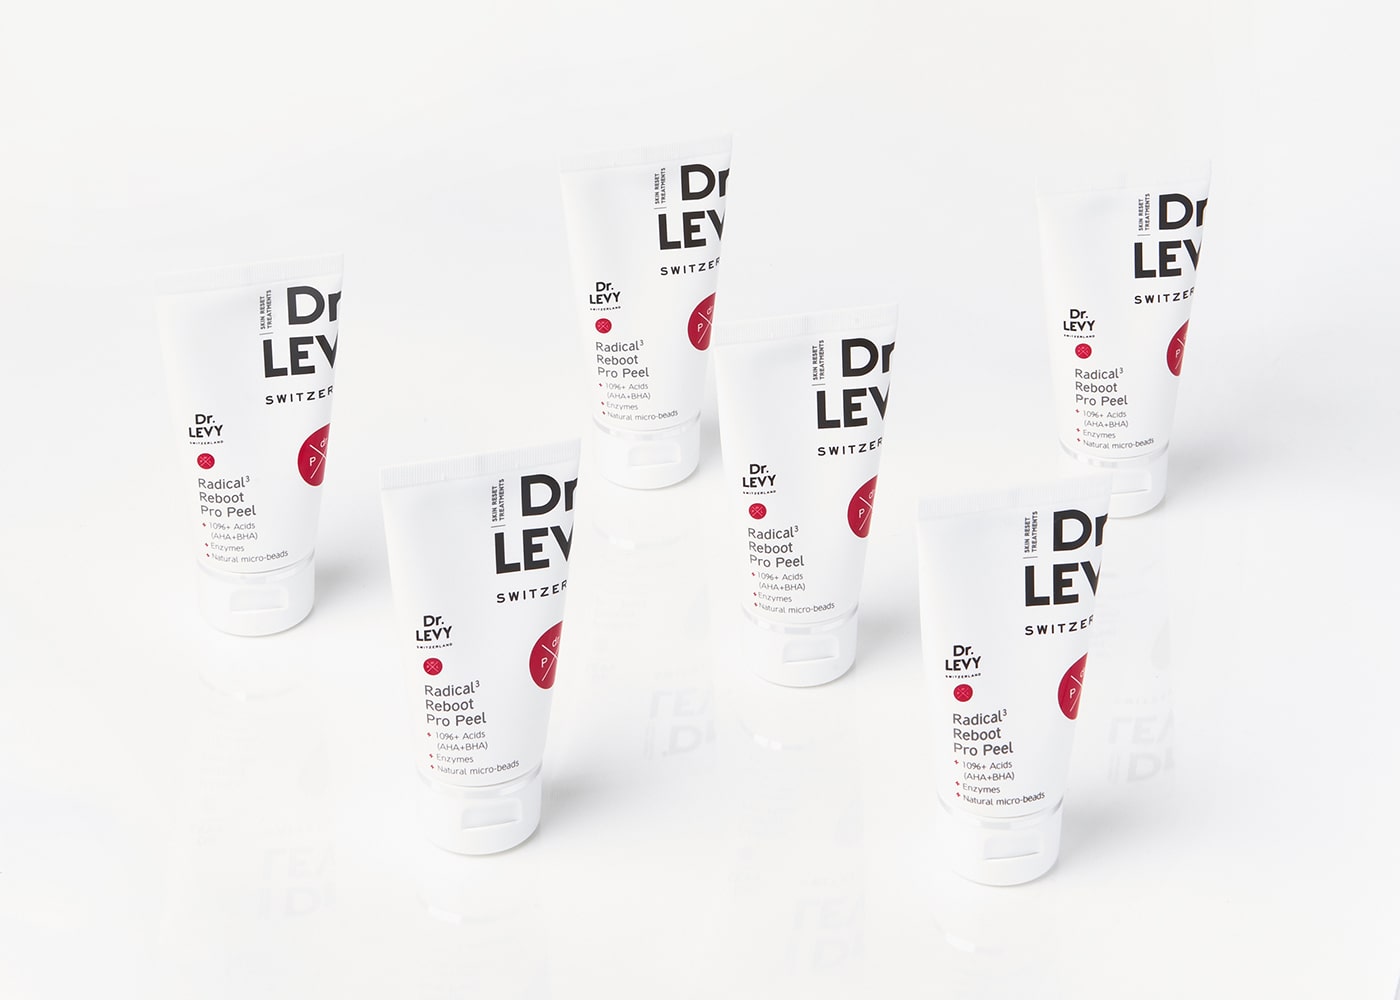 dr-levy-switzerland-skin-care-beauty-product-radical3-reboot-pro-peel-army.jpg